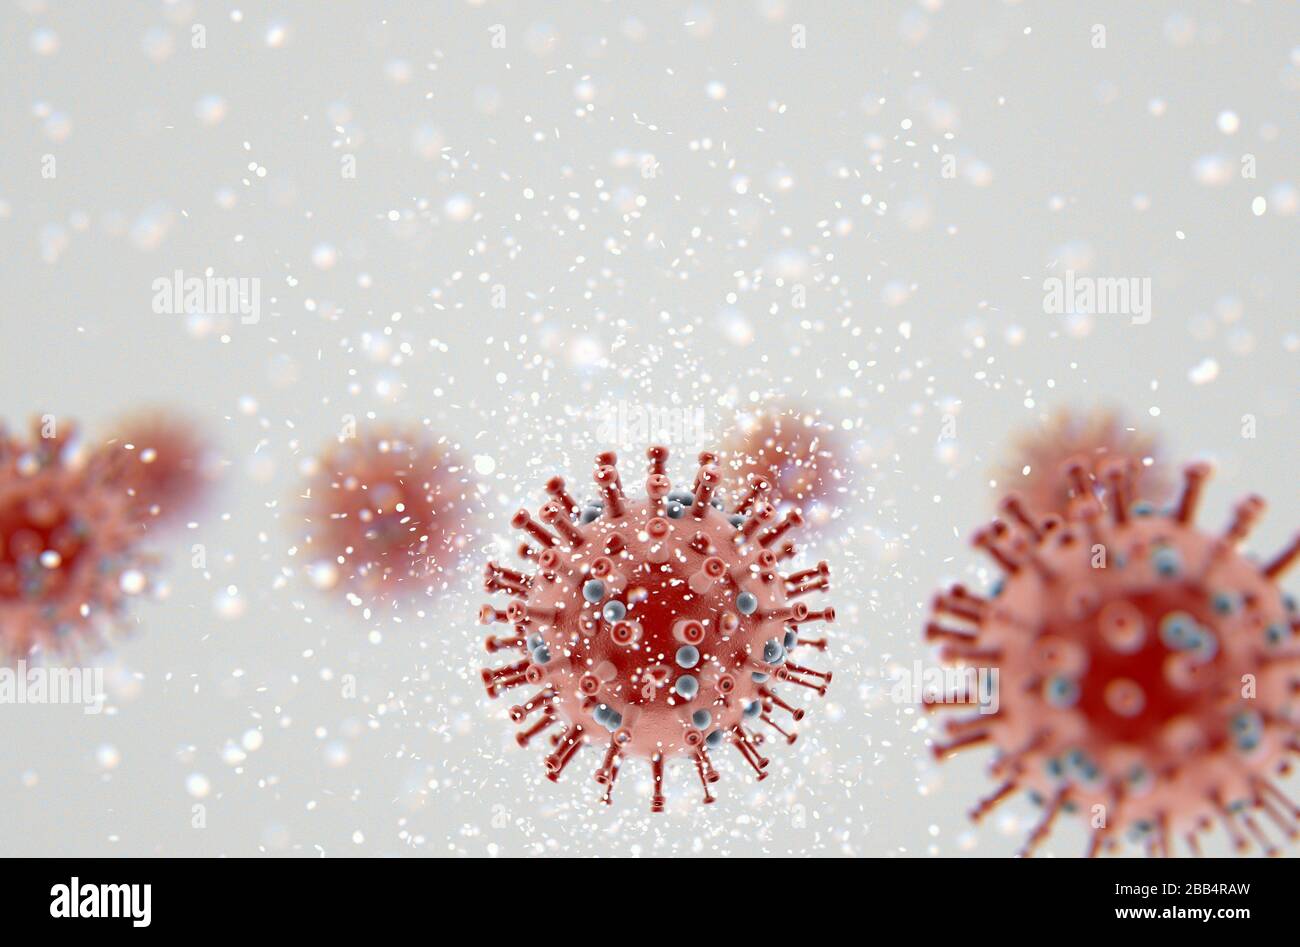 A microscopic close up view of airborne red coronavirus particles  - 3D render Stock Photo